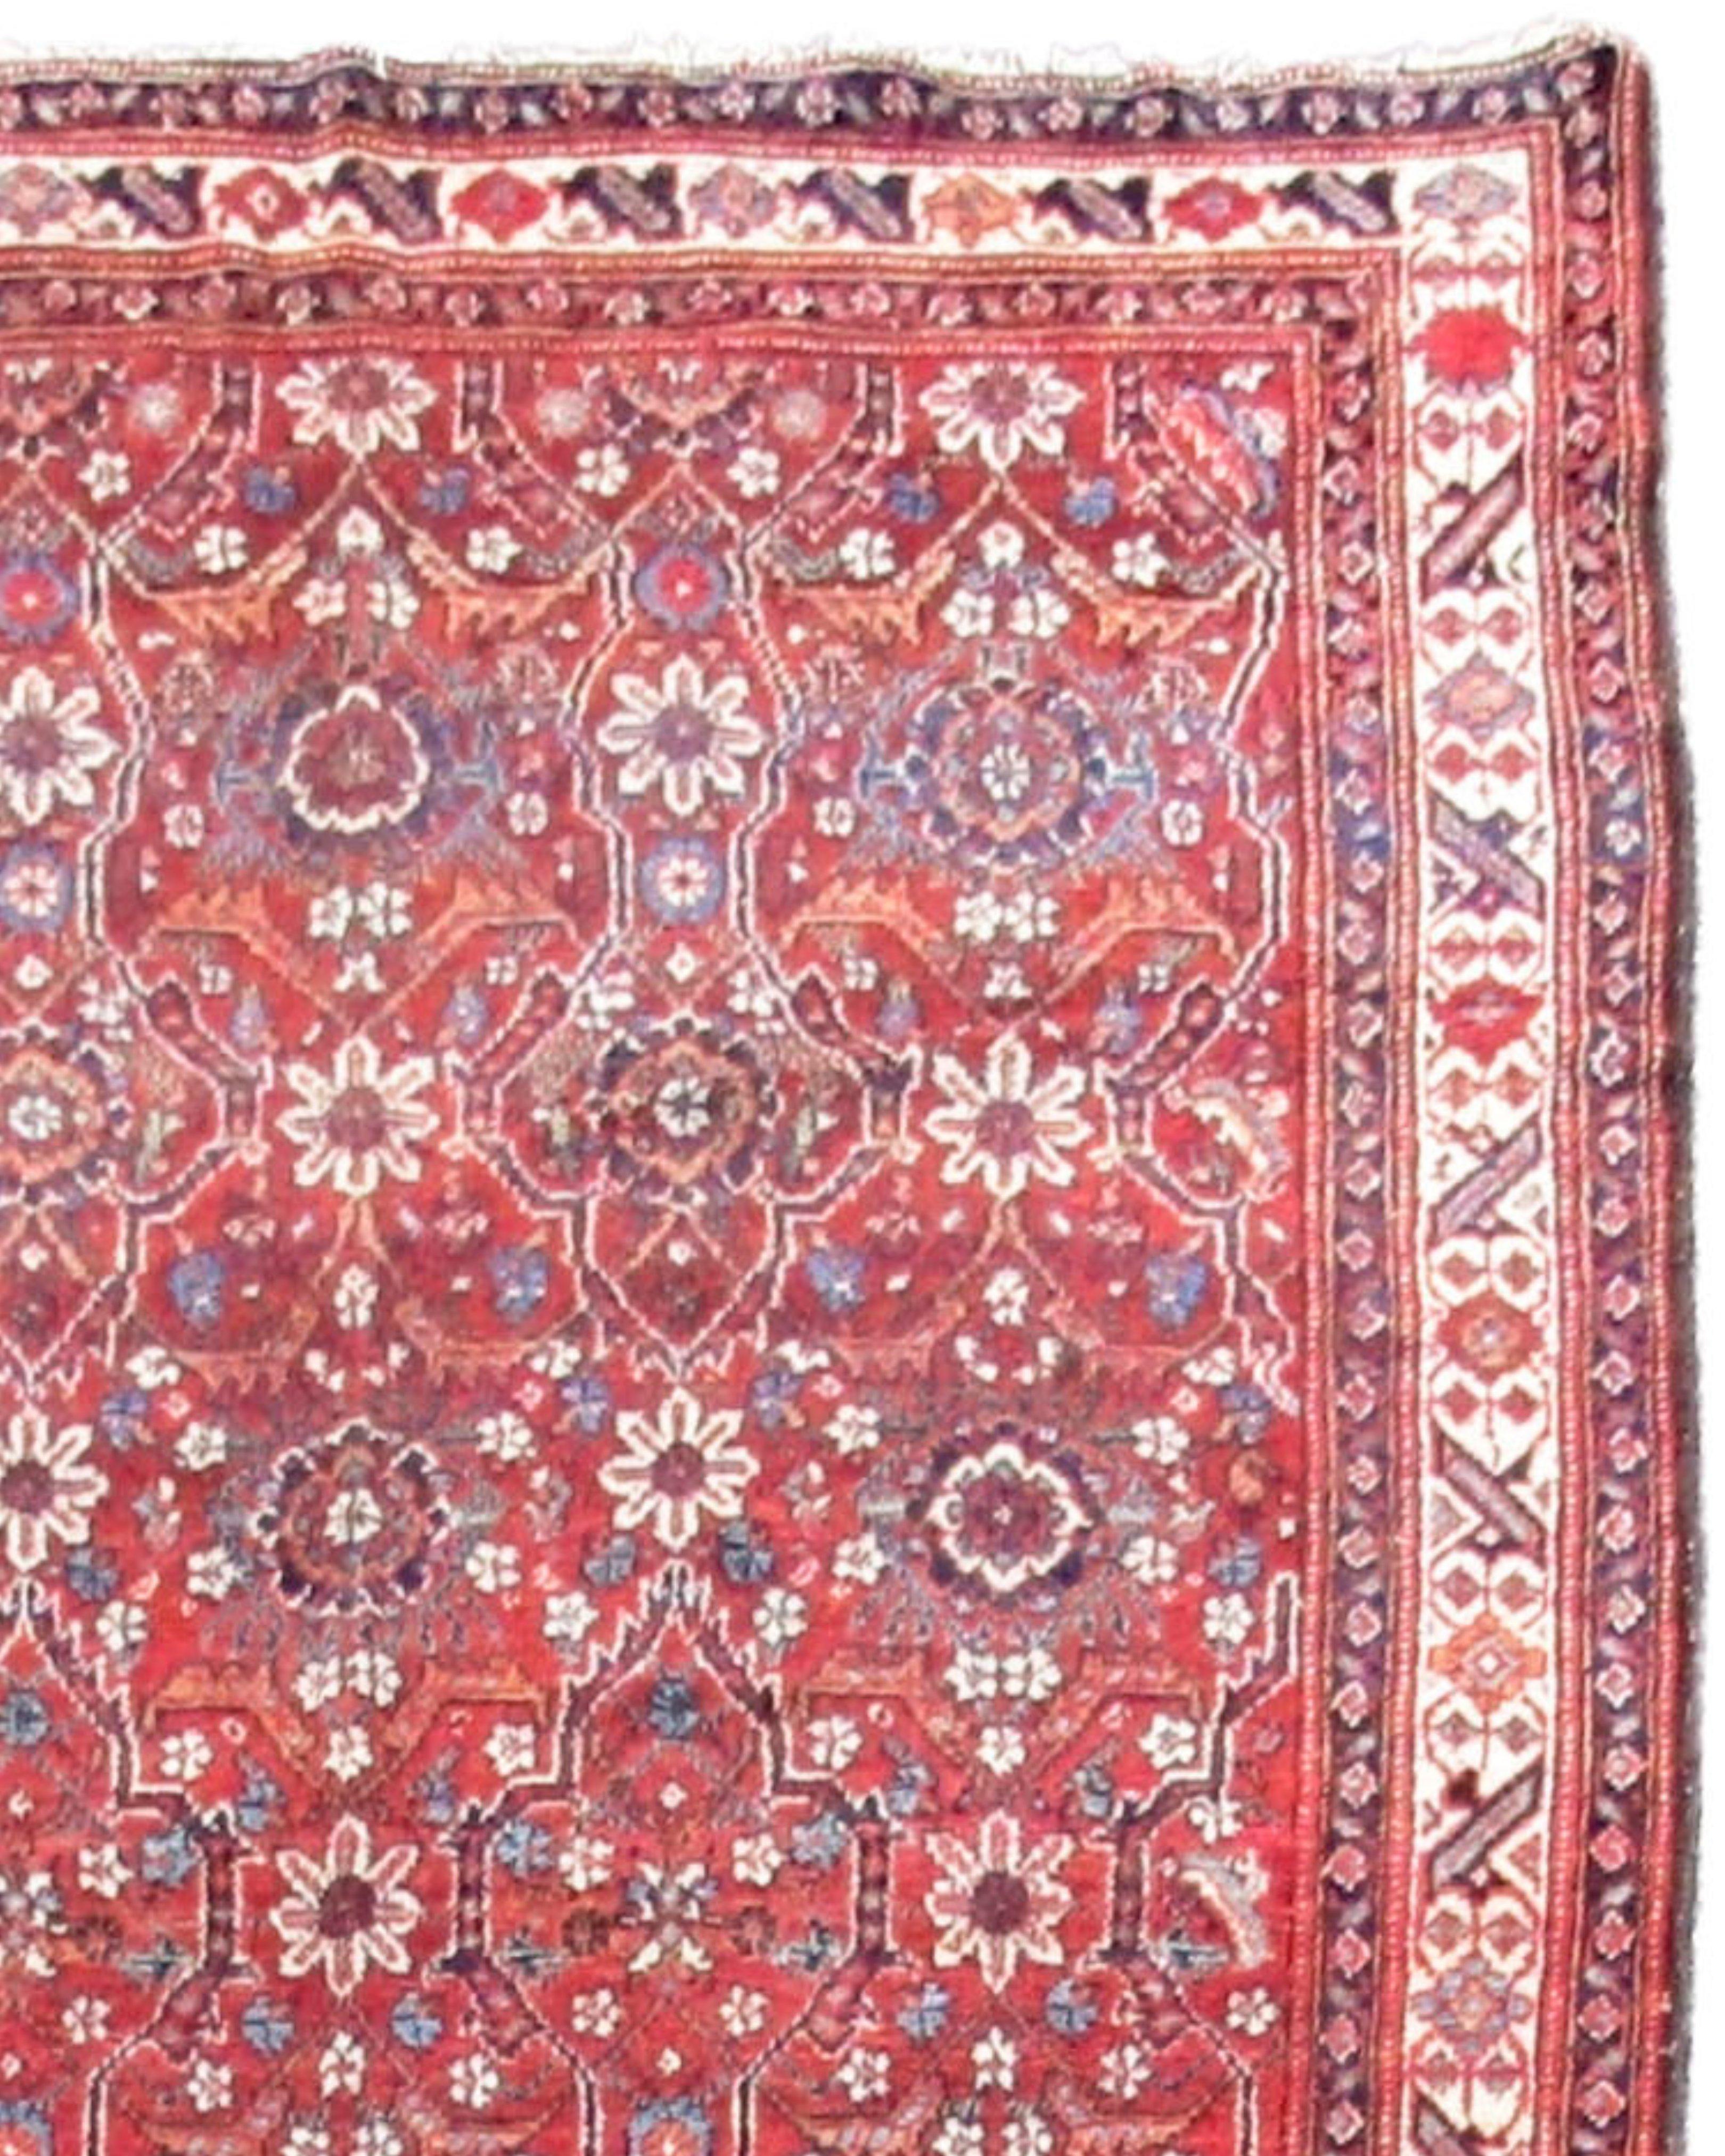 Antique Northwest Persian Long Rug, Early 20th Century

Additional Information:
Dimensions: 5'2